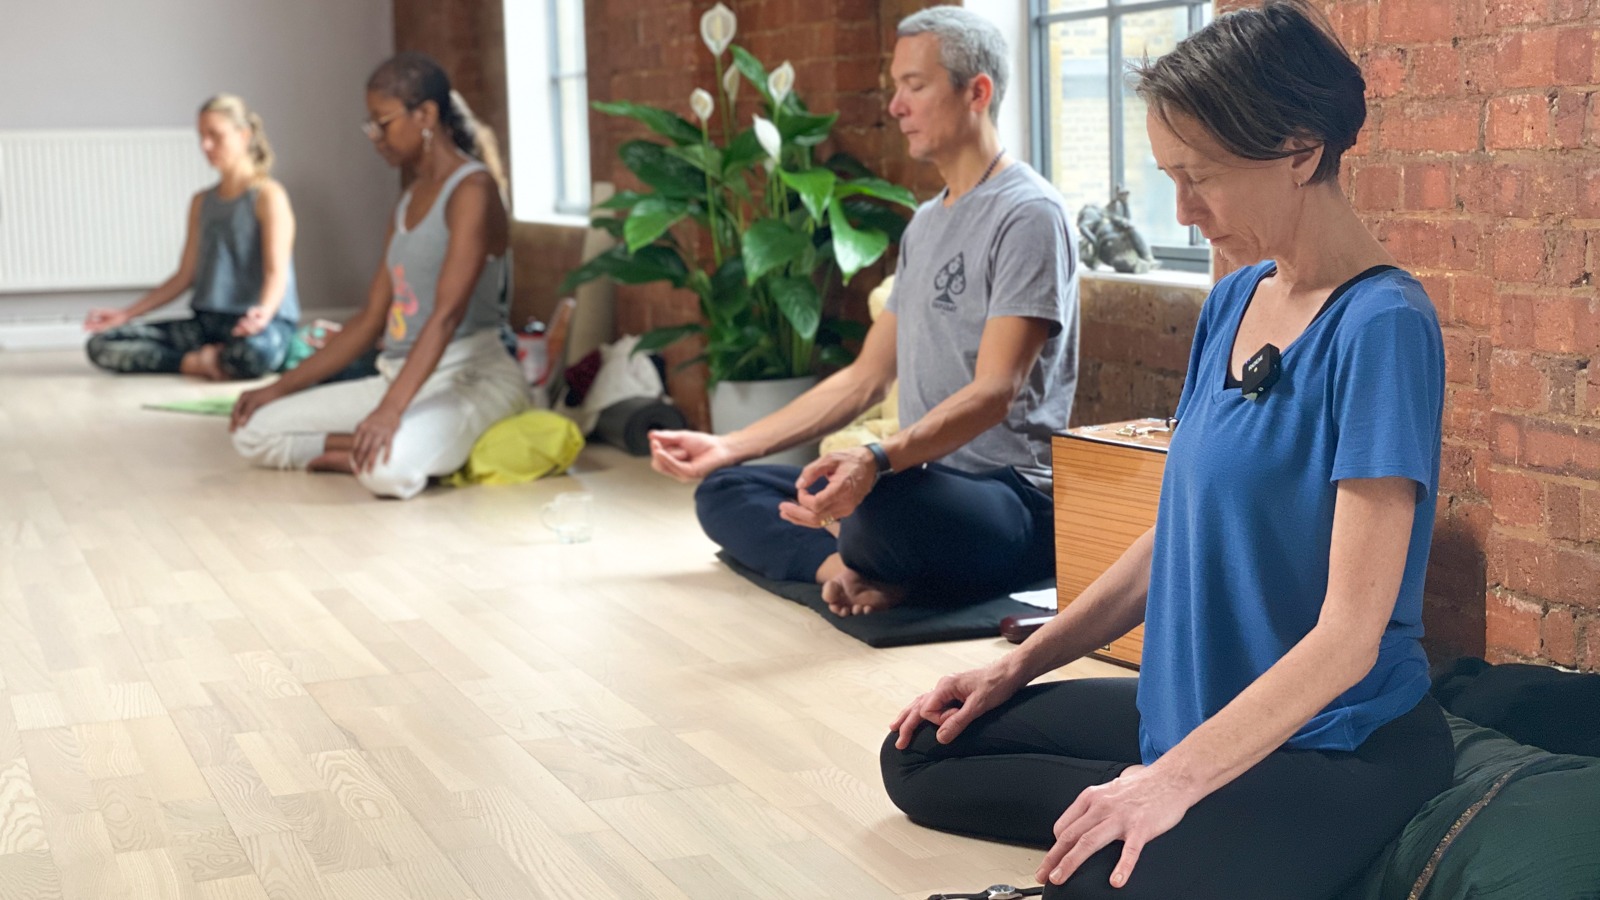 Registering your hours with Yoga Alliance: Yin Yoga Course - YOGALEELA